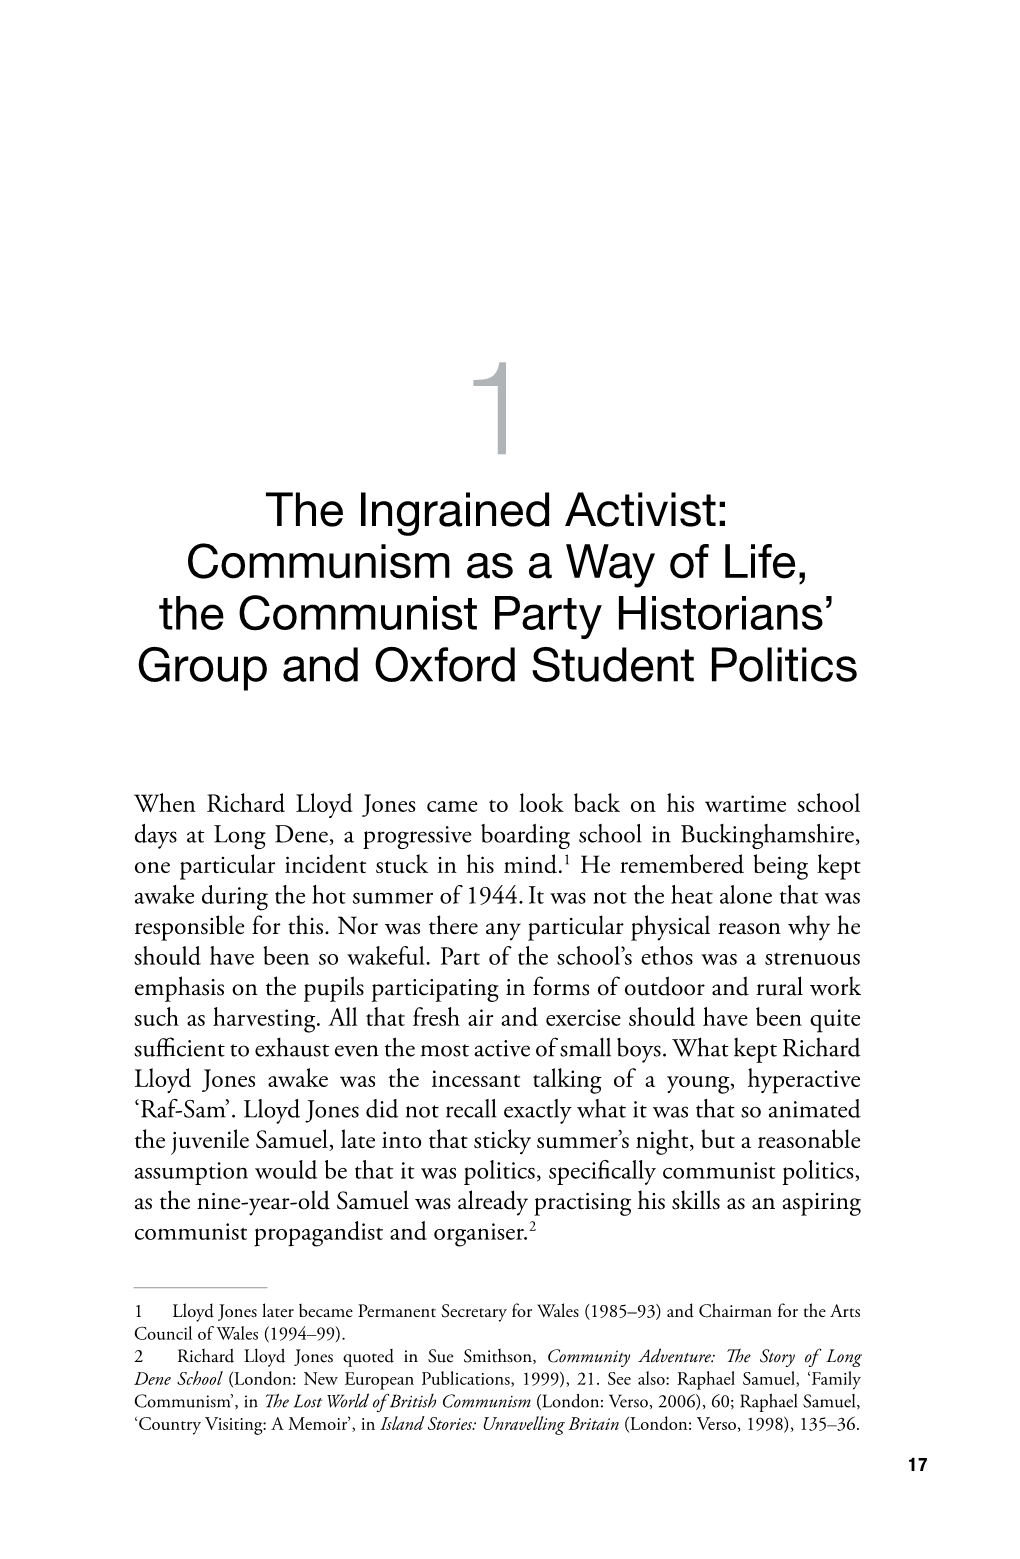 Communism As a Way of Life, the Communist Party Historians’ Group and Oxford Student Politics